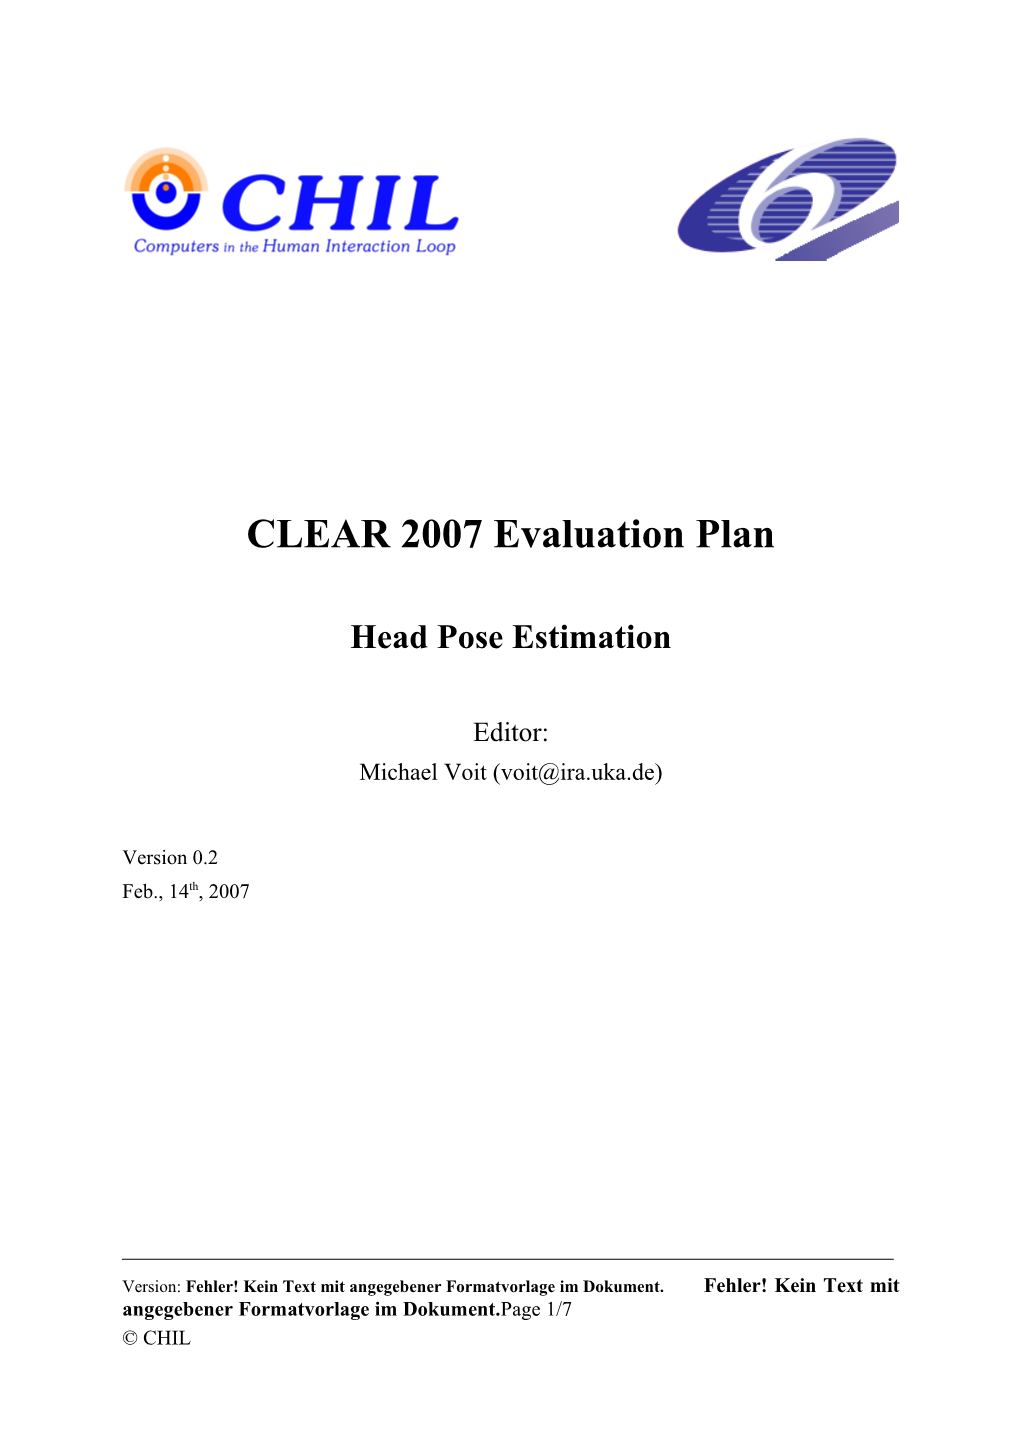 Data Collection and Evaluation Plan